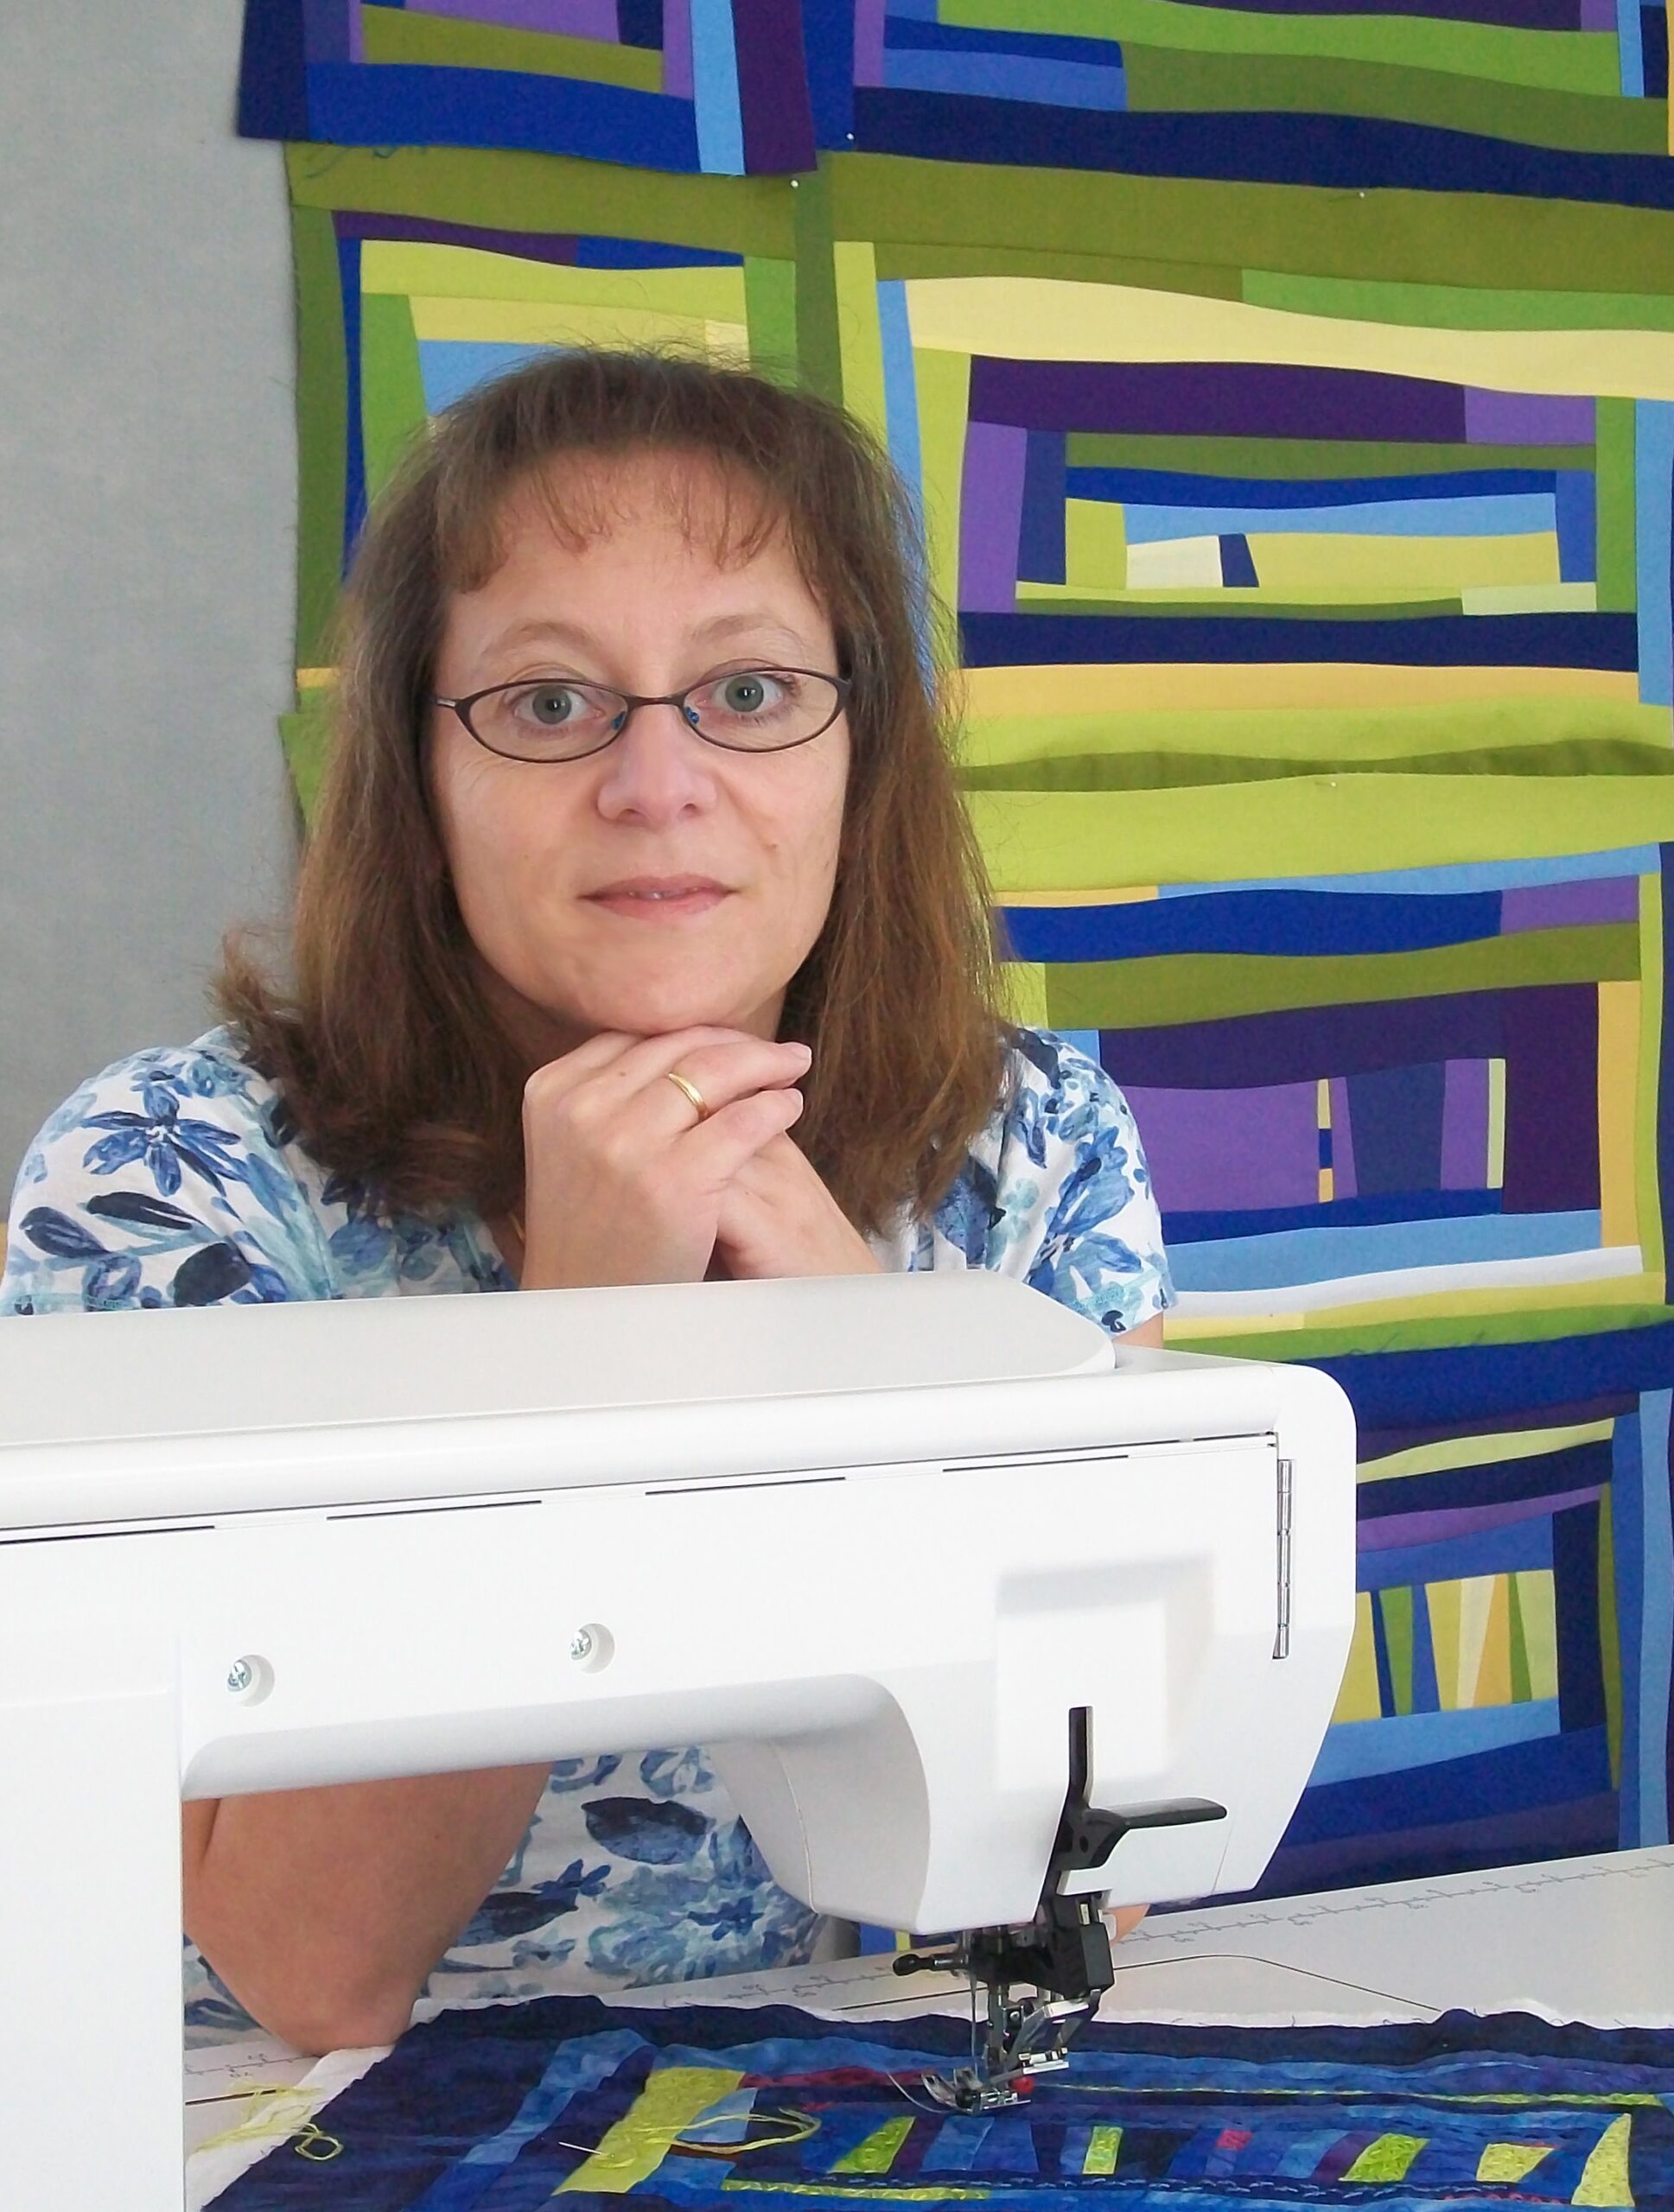 A woman sits behind a sewing machine with a project on it. There is a tapestry on the wall behind her that is very similar to the project she is working on